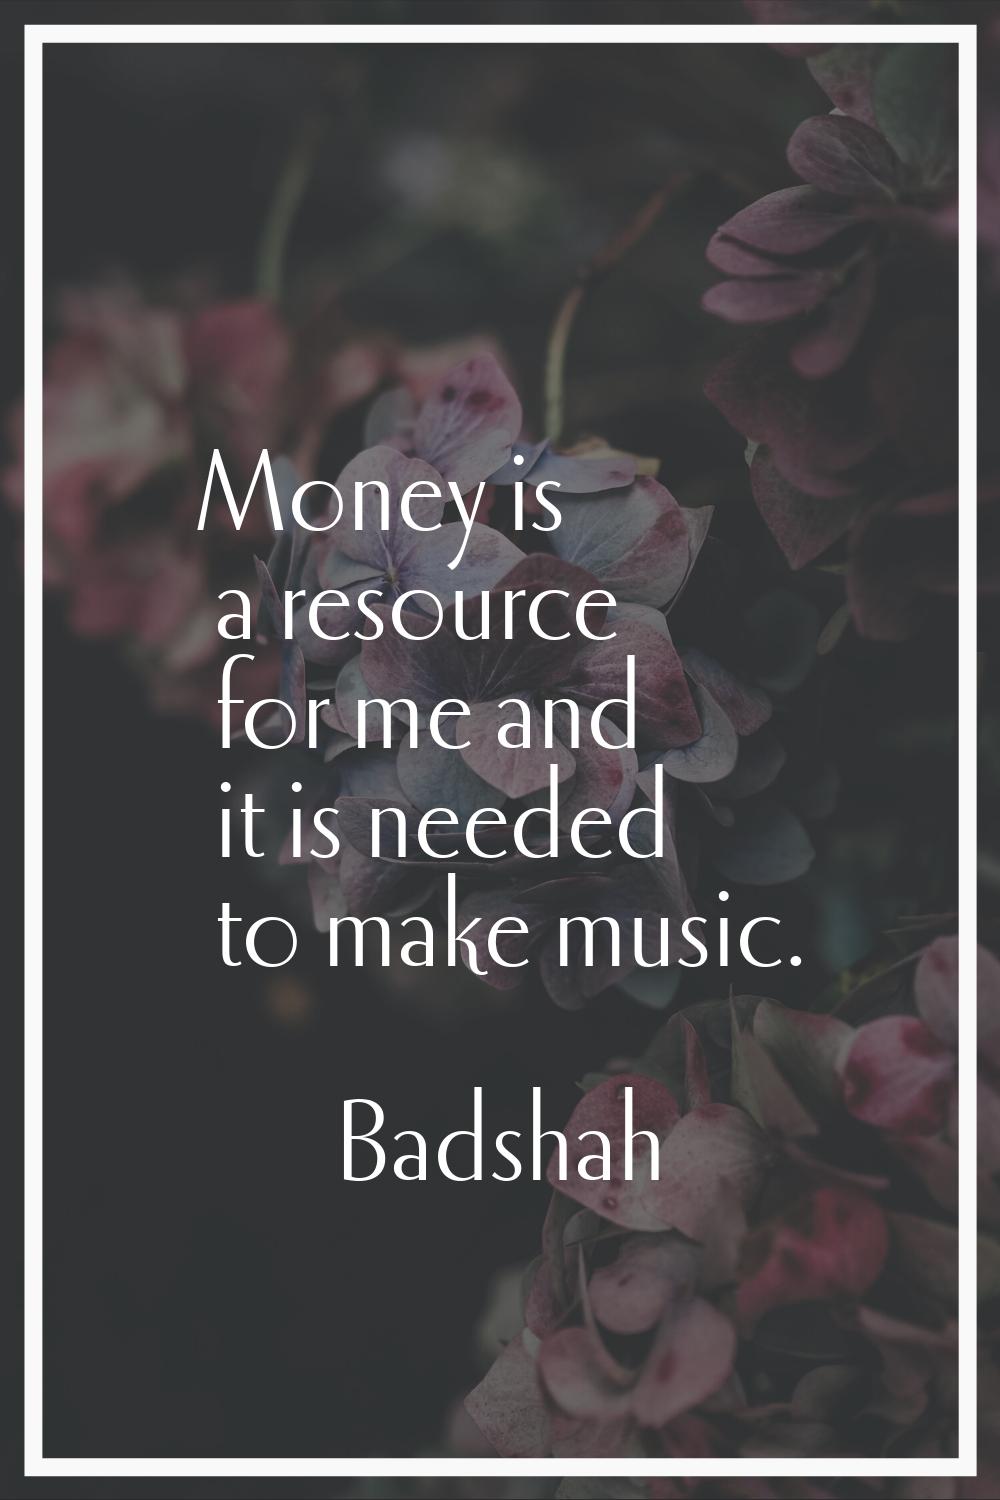 Money is a resource for me and it is needed to make music.